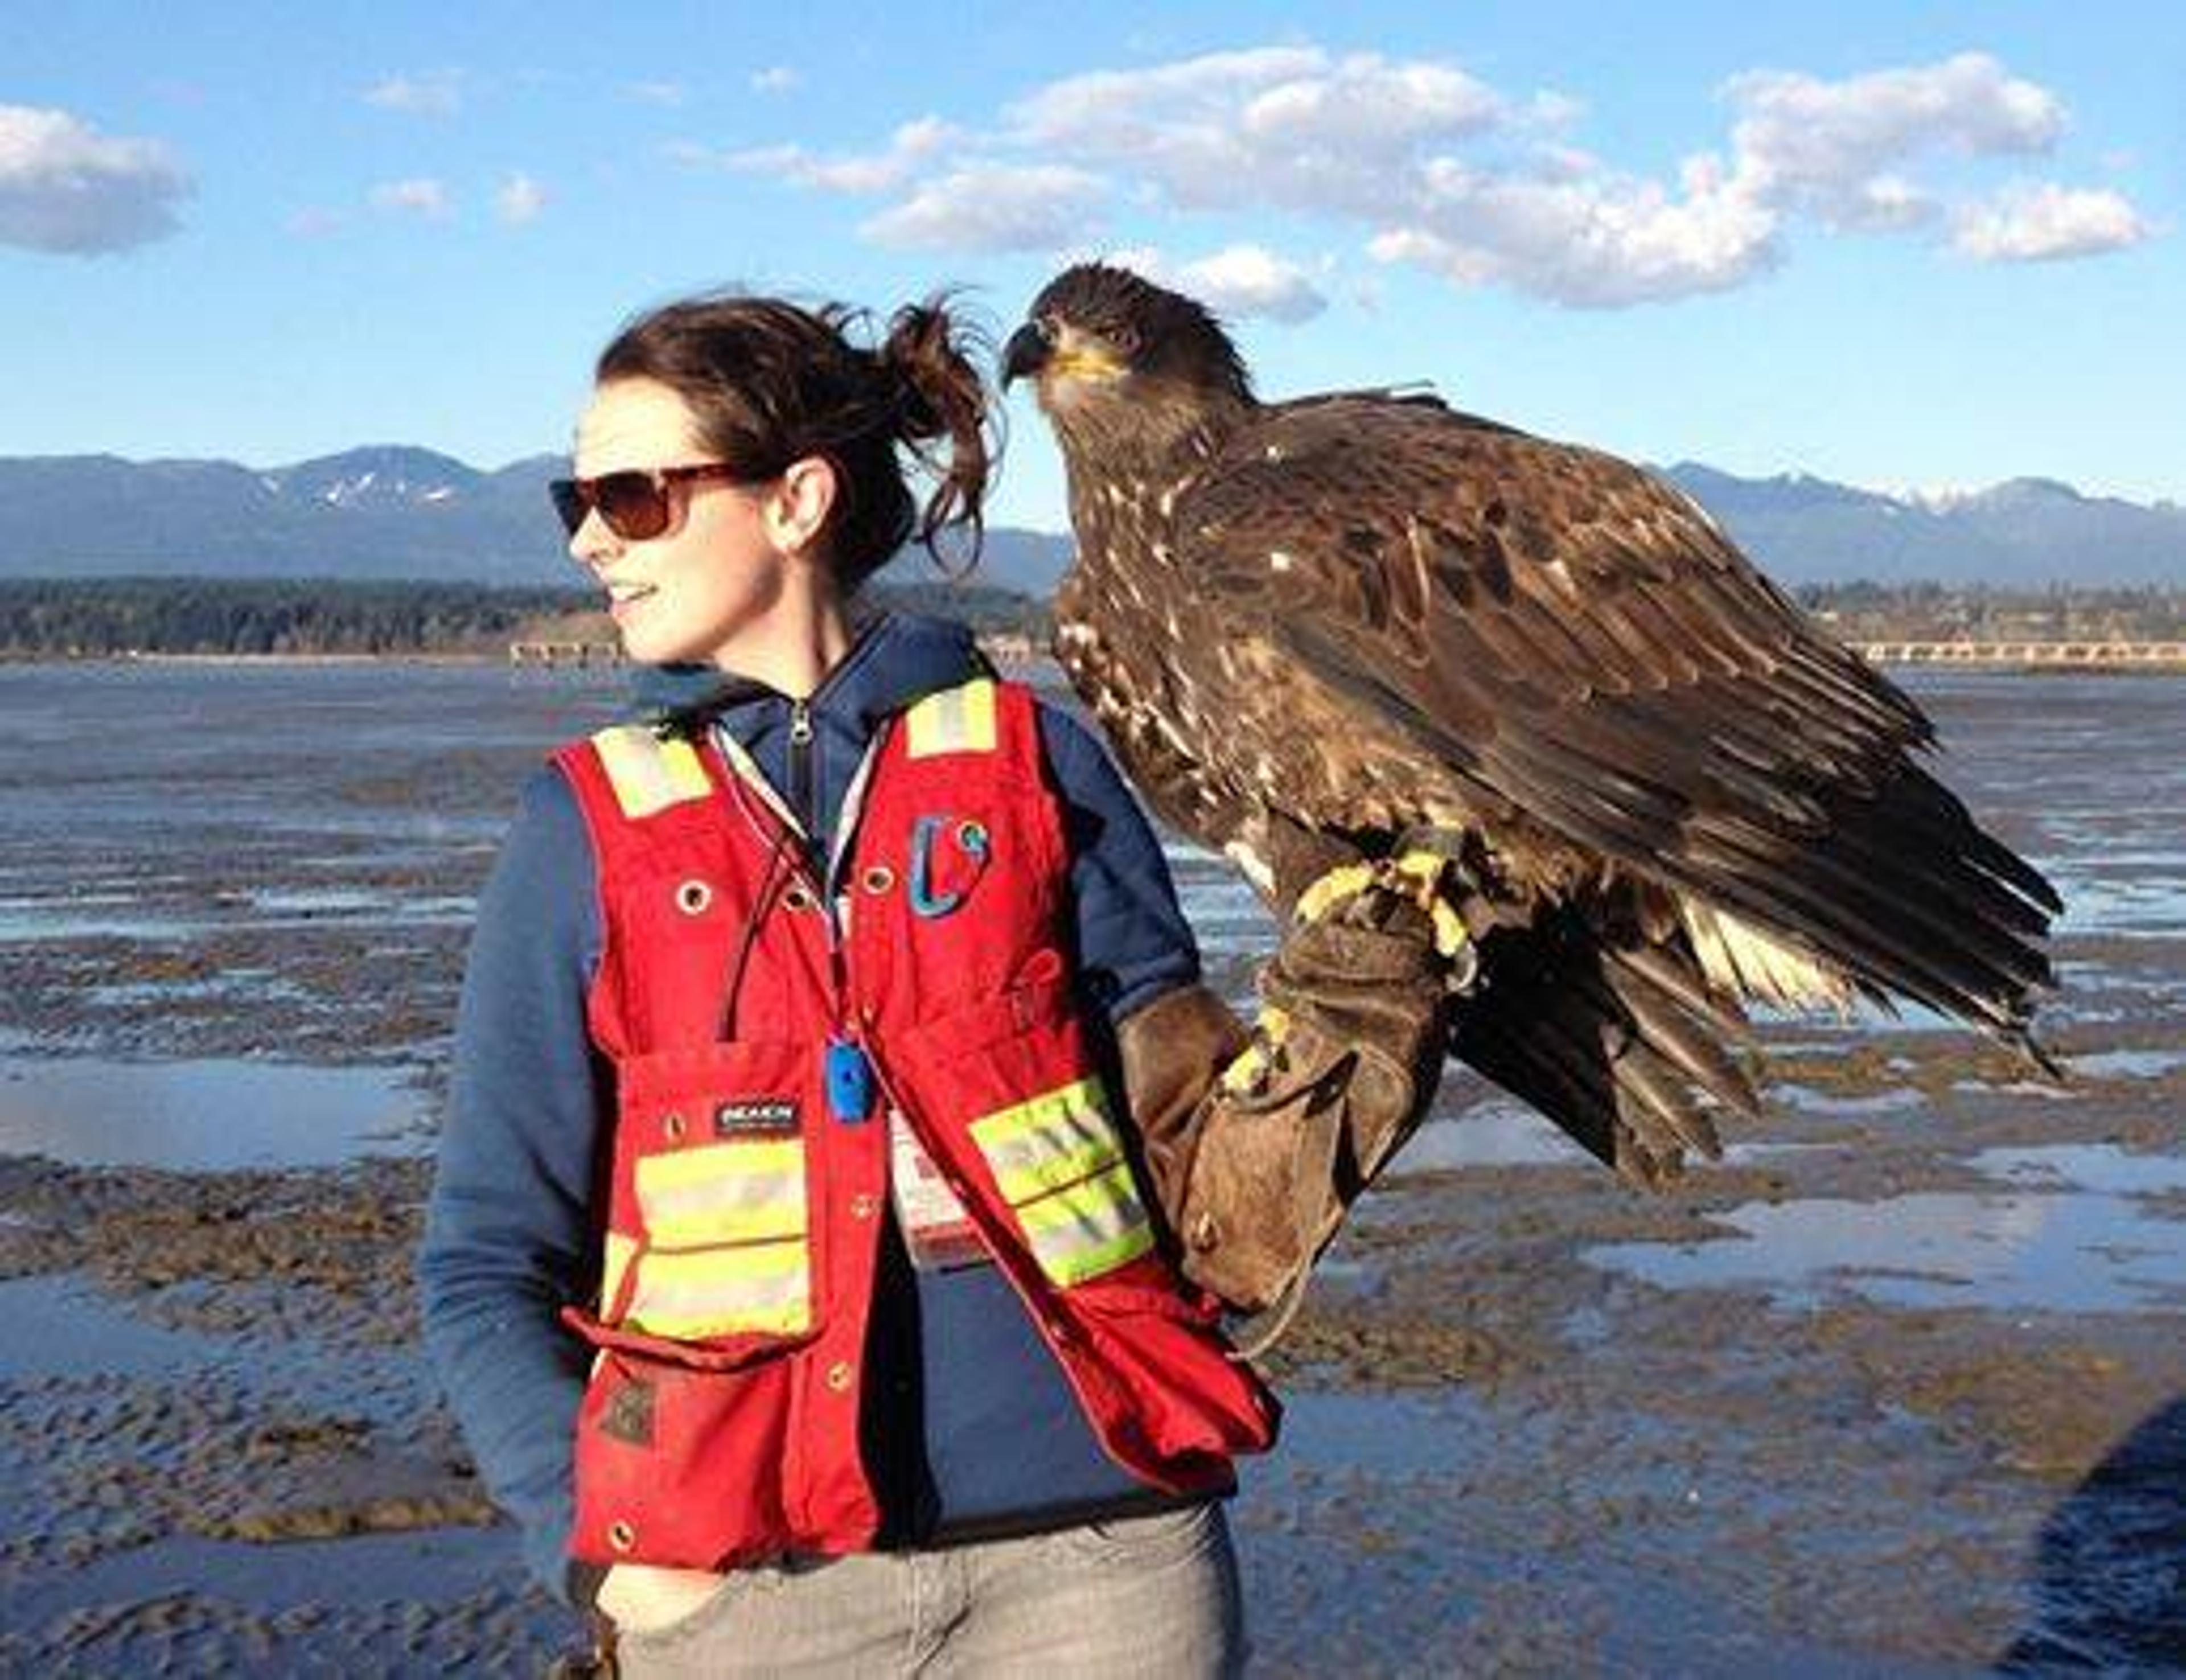 Raptors employee stands on the beach with an eagle on her glove